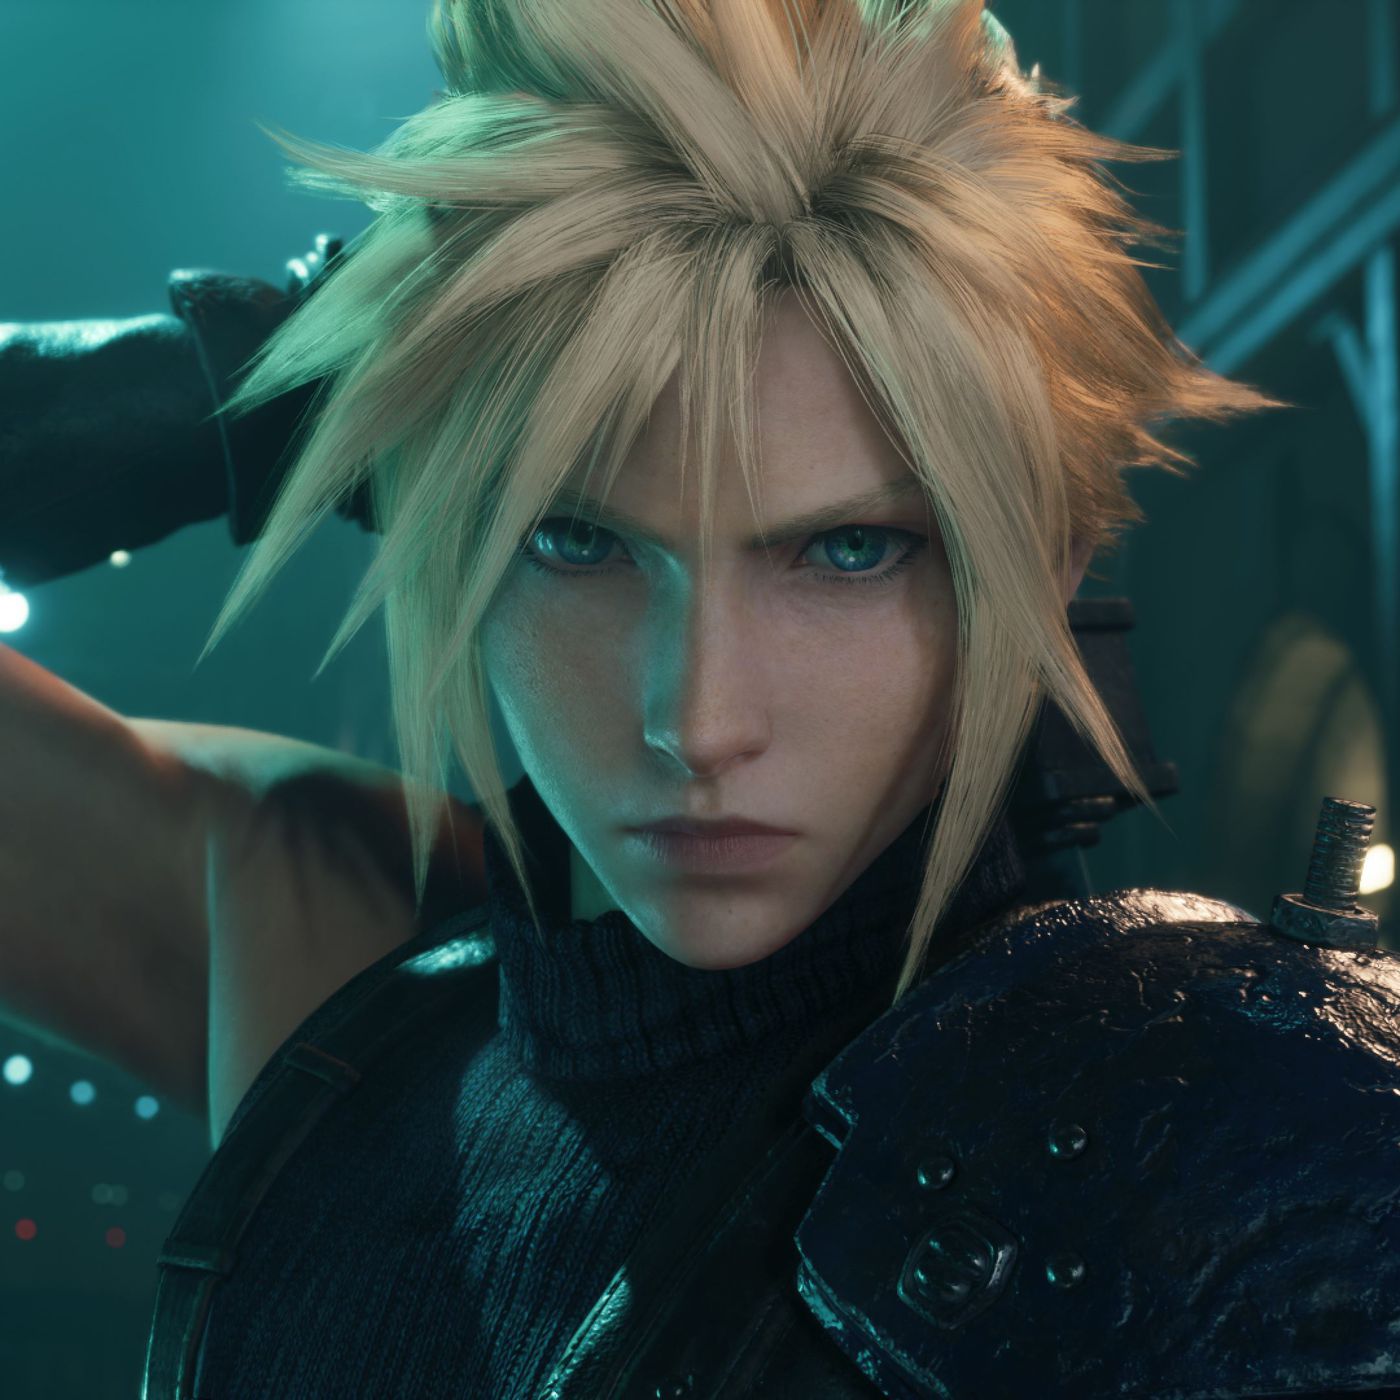 Cloud Strife's muscle mass on PS5: a very important investigation